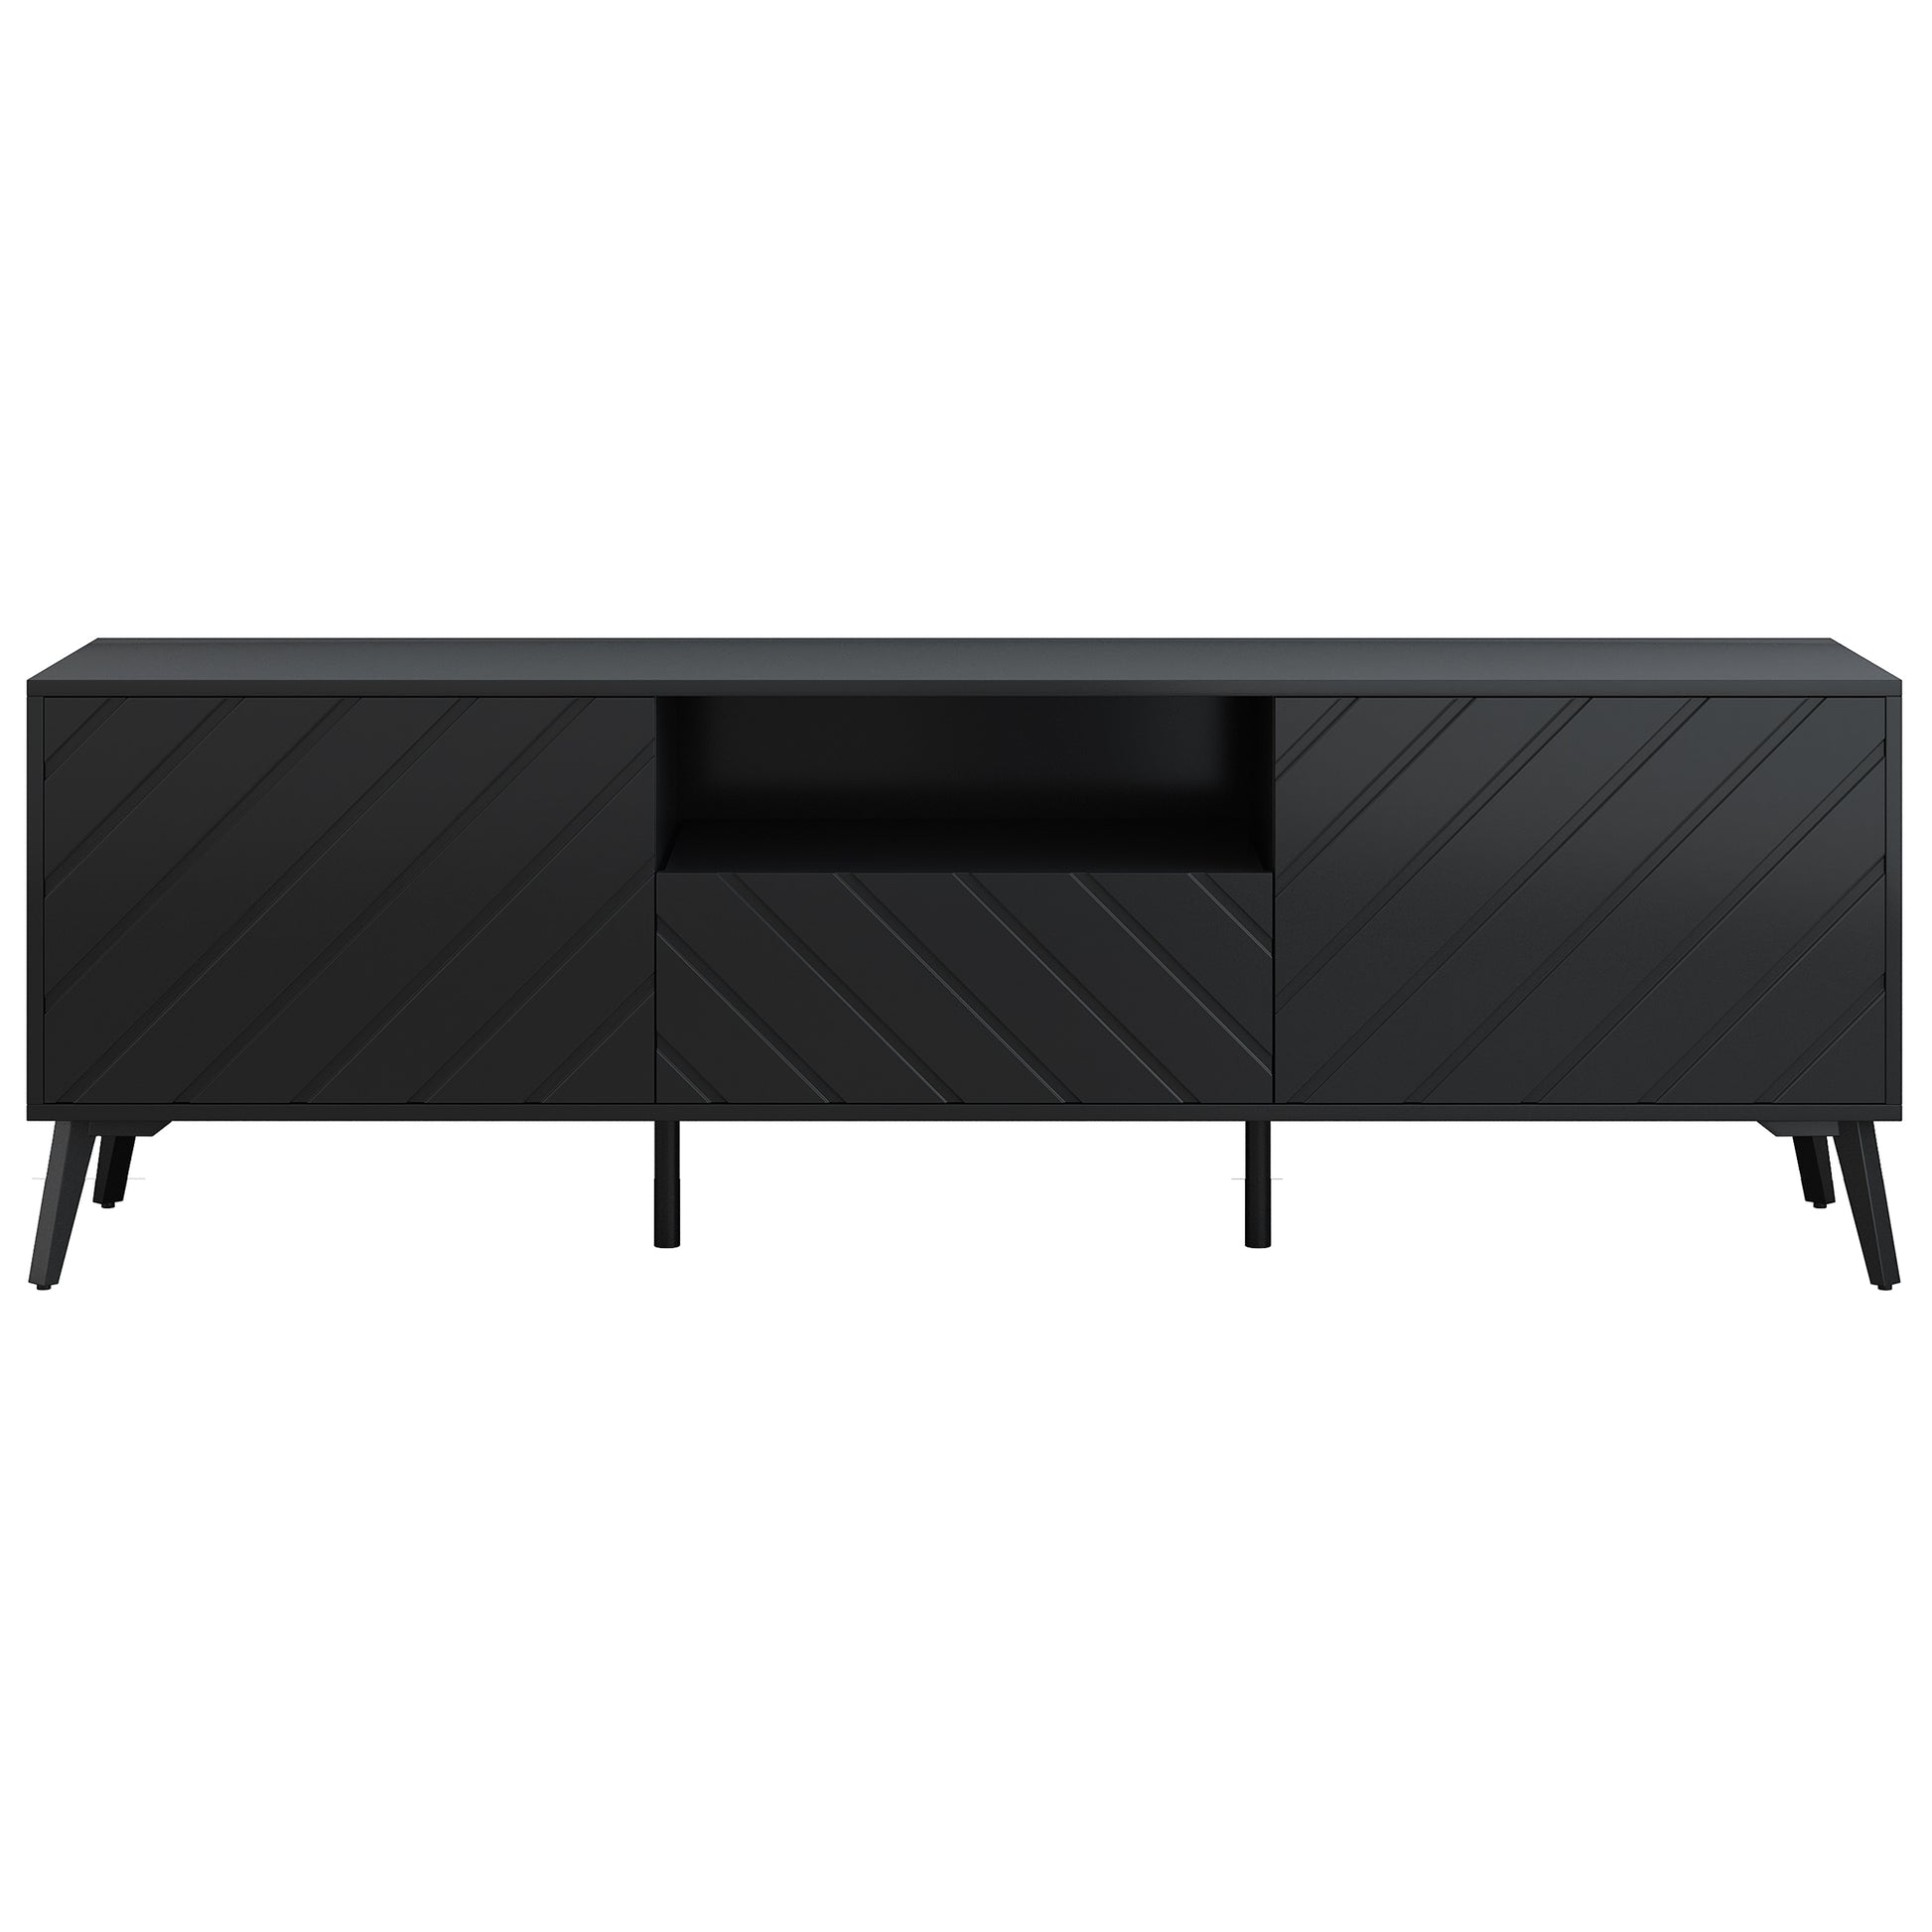 U Can Modern TV Stand for 70 inch TV, Entertainment black-mdf